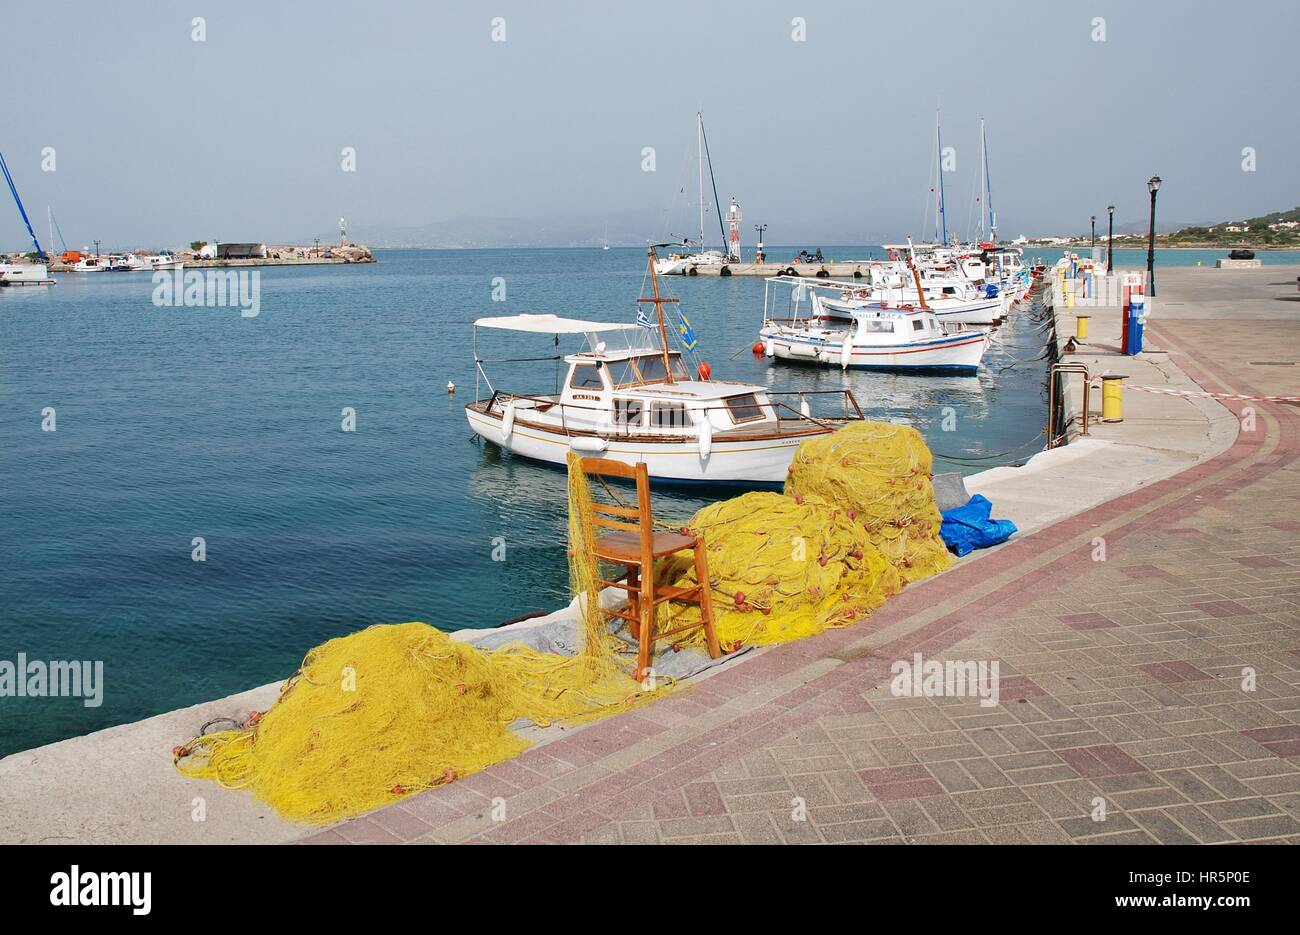 Small boats moored at Milos harbour on the Greek island of Agistri on May 12, 2016. Under an hour from Piraeus, the island is popular with Athenians. Stock Photo